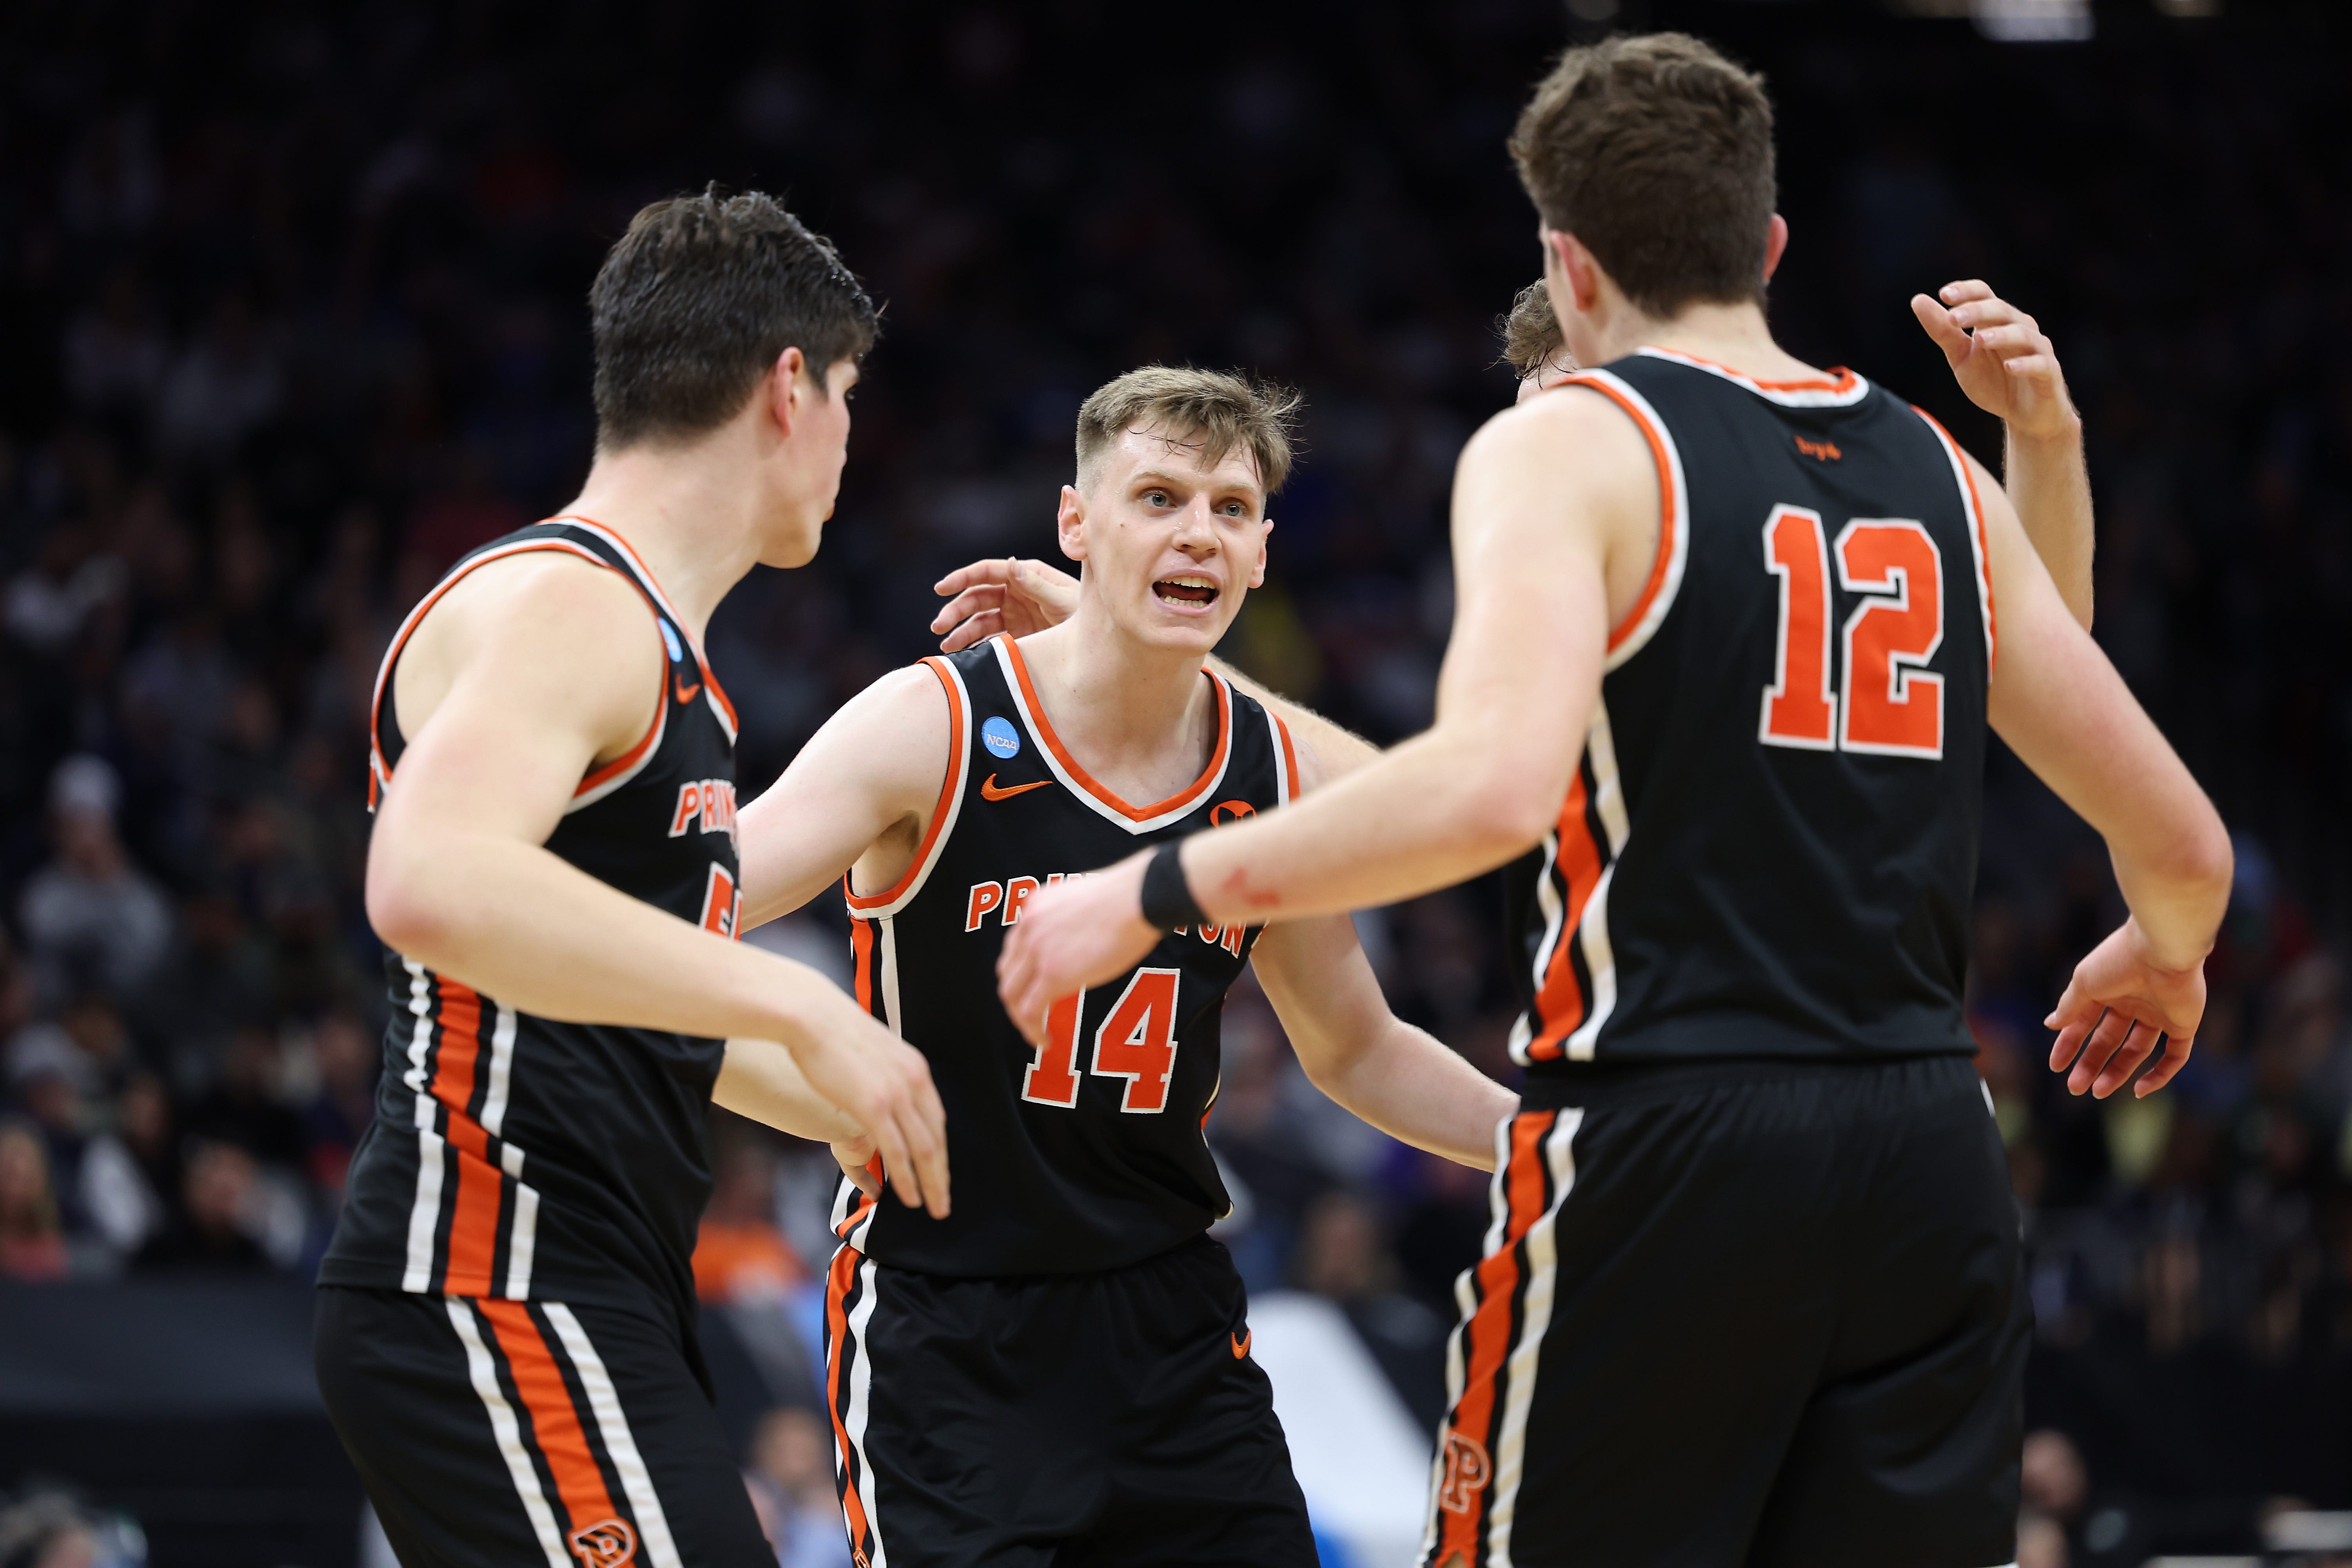 Mar 16, 2023; Sacramento, CA, USA; Princeton Tigers guard Matt Allocco (14) gathers with forward Caden Pierce (12) and forward Zach Martini (54) against the Arizona Wildcats during the second half at Golden 1 Center. Mandatory Credit: Kelley L Cox-USA TODAY Sports